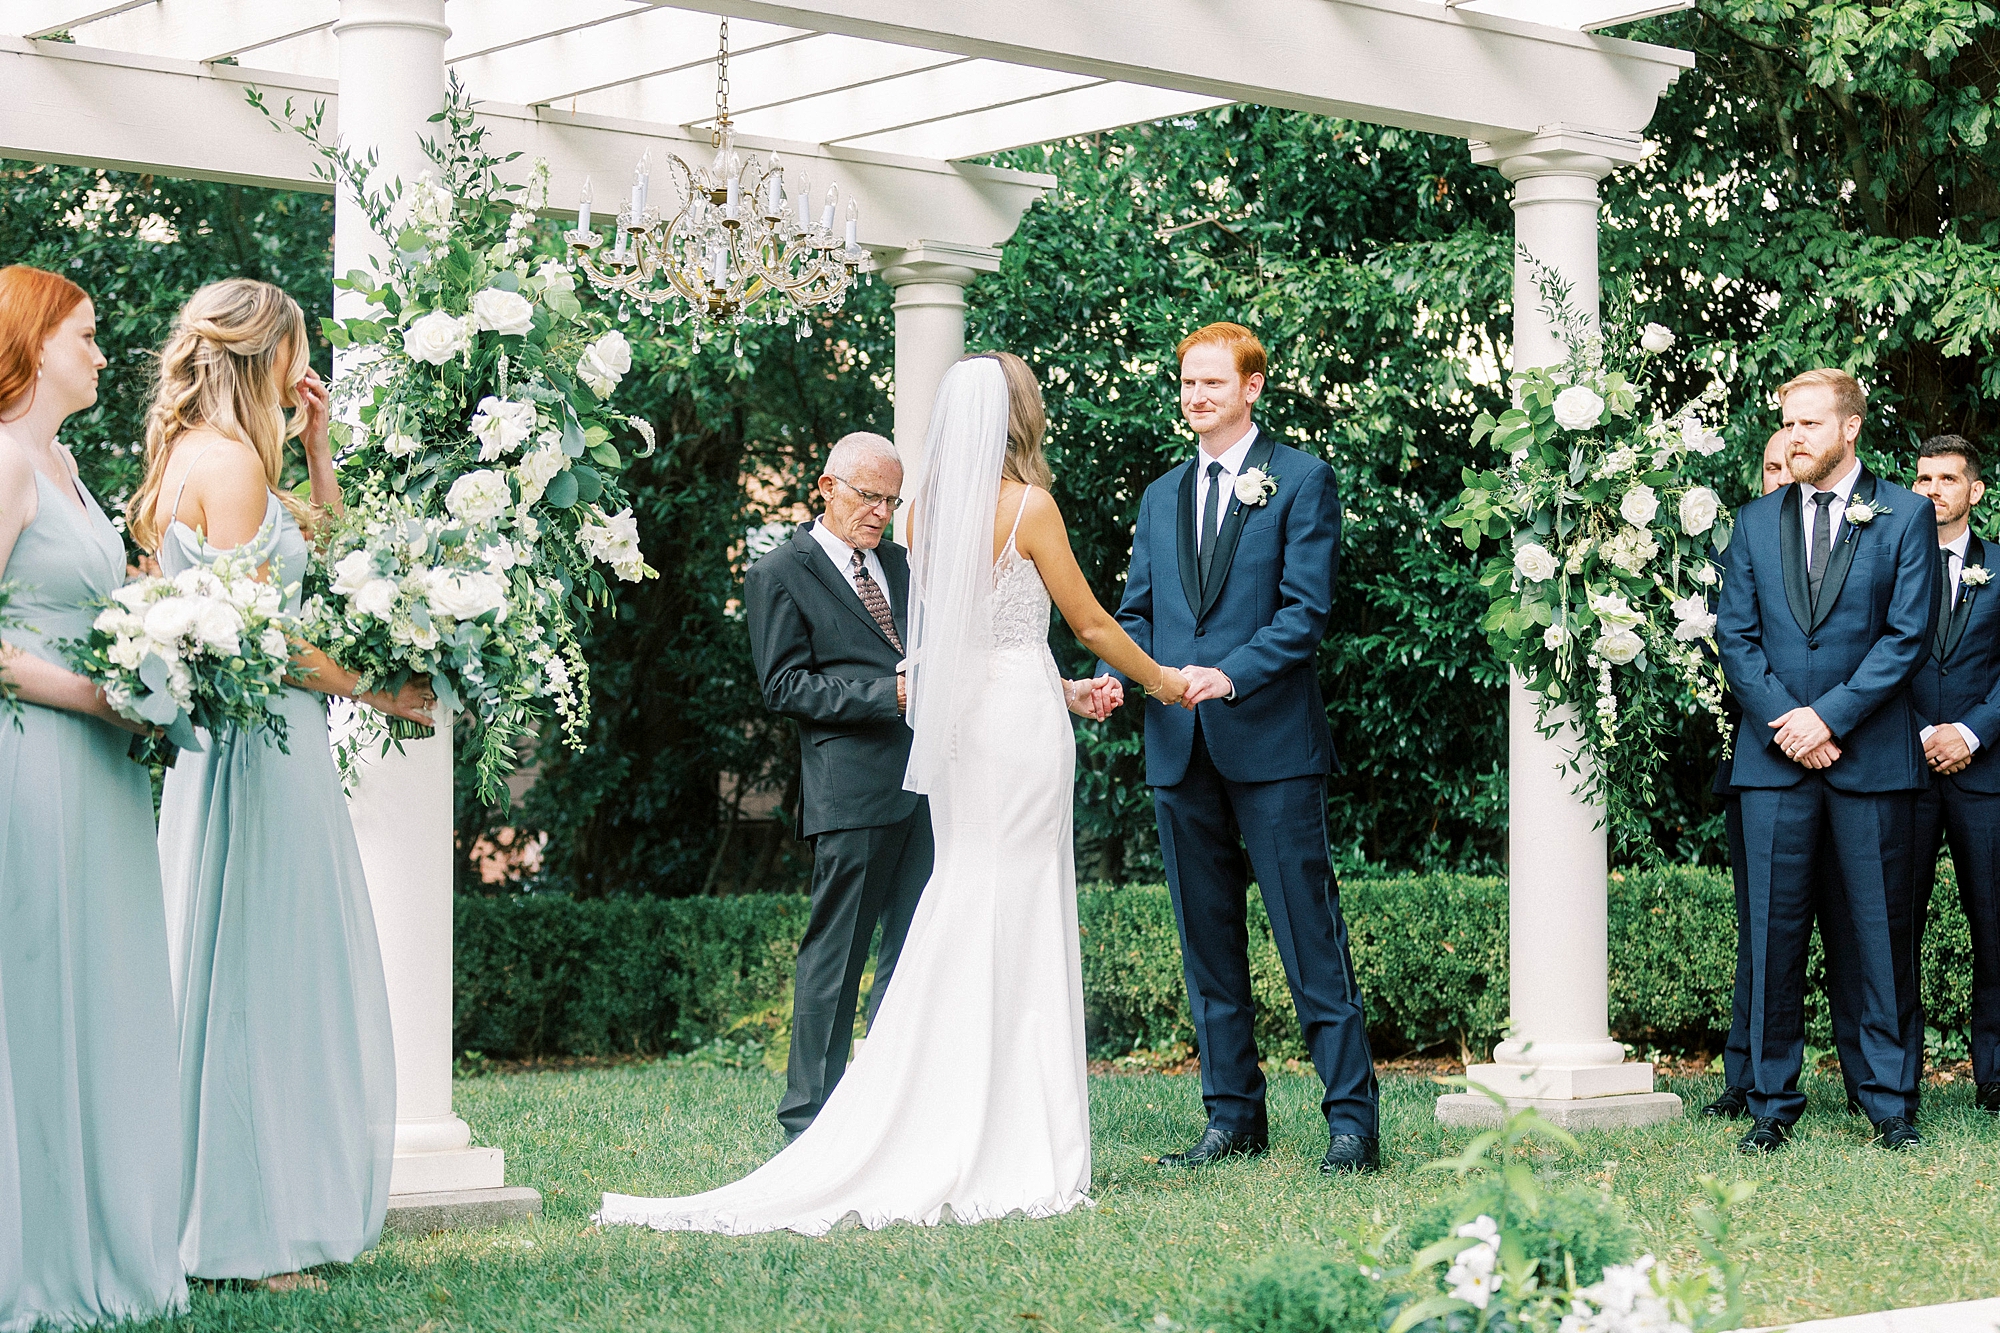 newlyweds hold hands under white pergola for outdoor wedding ceremony at Separk Mansion